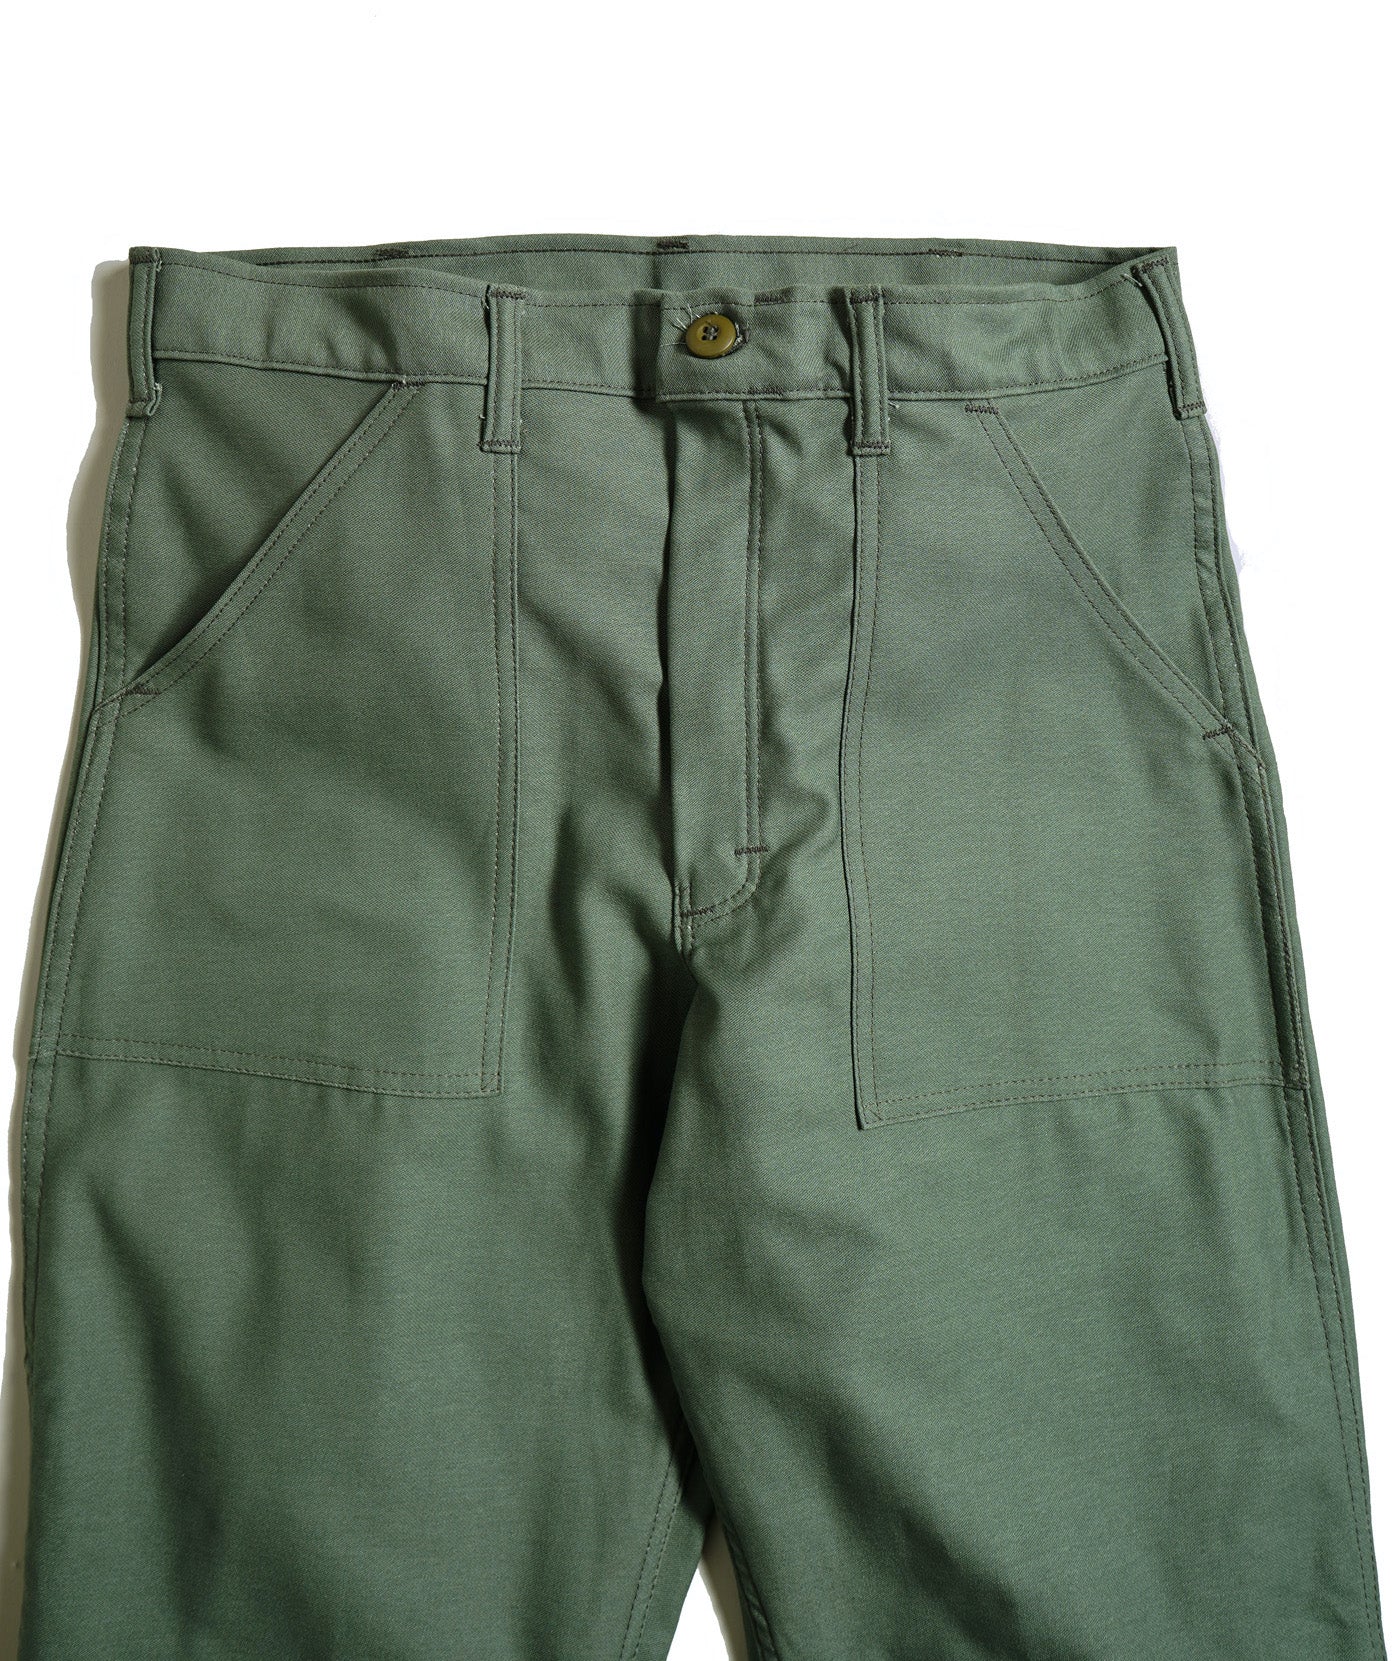 Stan Ray Fatigue pant front pocket detail 